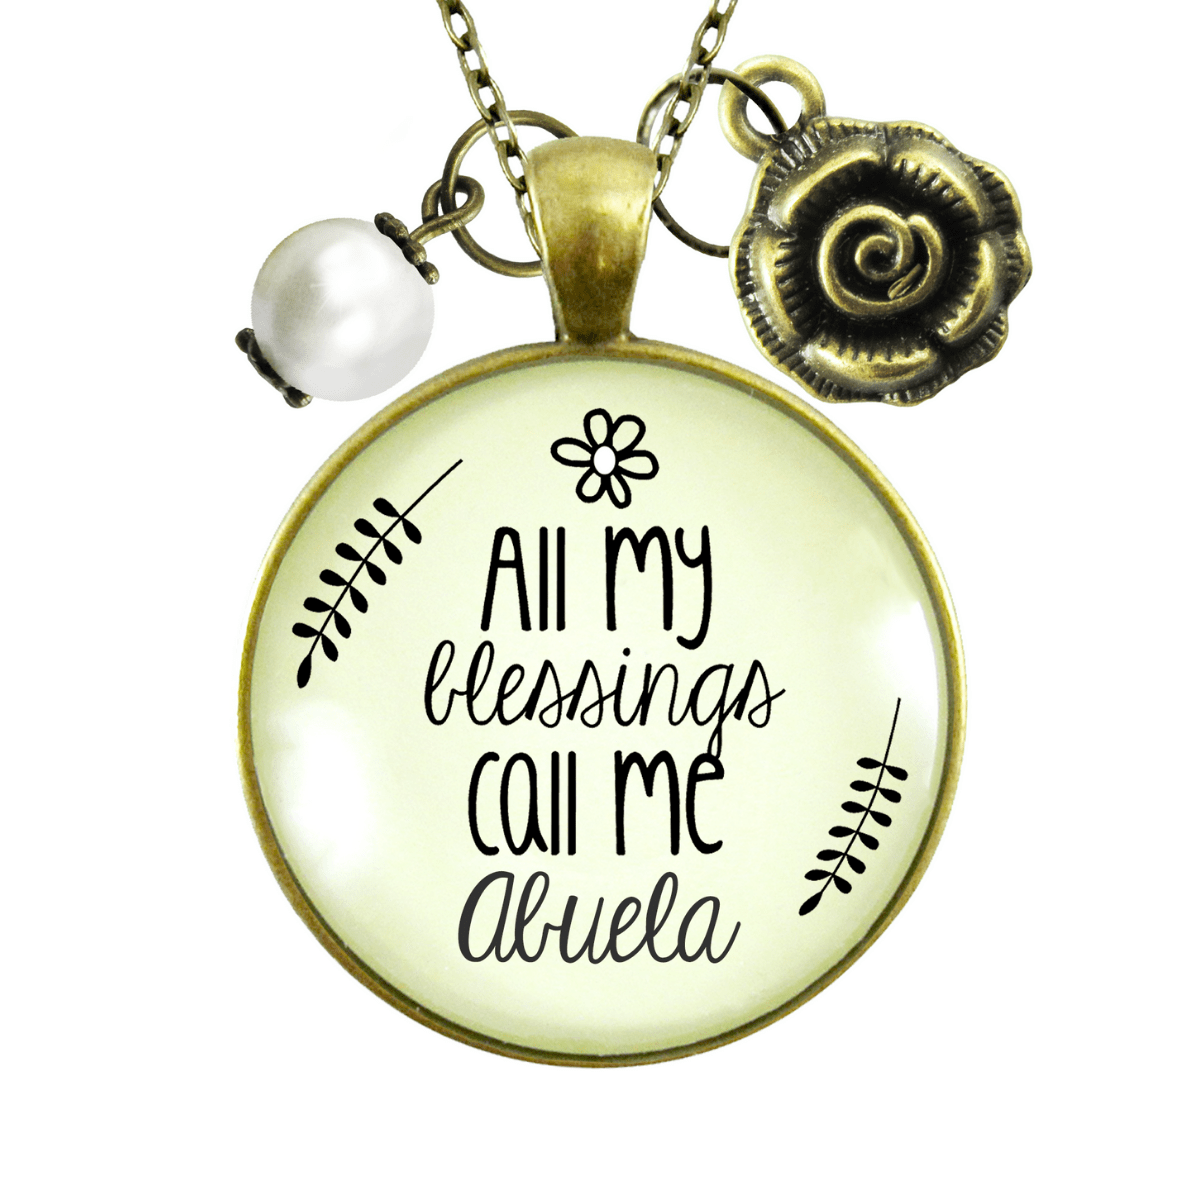 Gutsy Goodness Abuela Necklace All My Blessings Spanish Grandma Womens Family Gift Jewelry - Gutsy Goodness Handmade Jewelry;Abuela Necklace All My Blessings Spanish Grandma Womens Family Gift Jewelry - Gutsy Goodness Handmade Jewelry Gifts